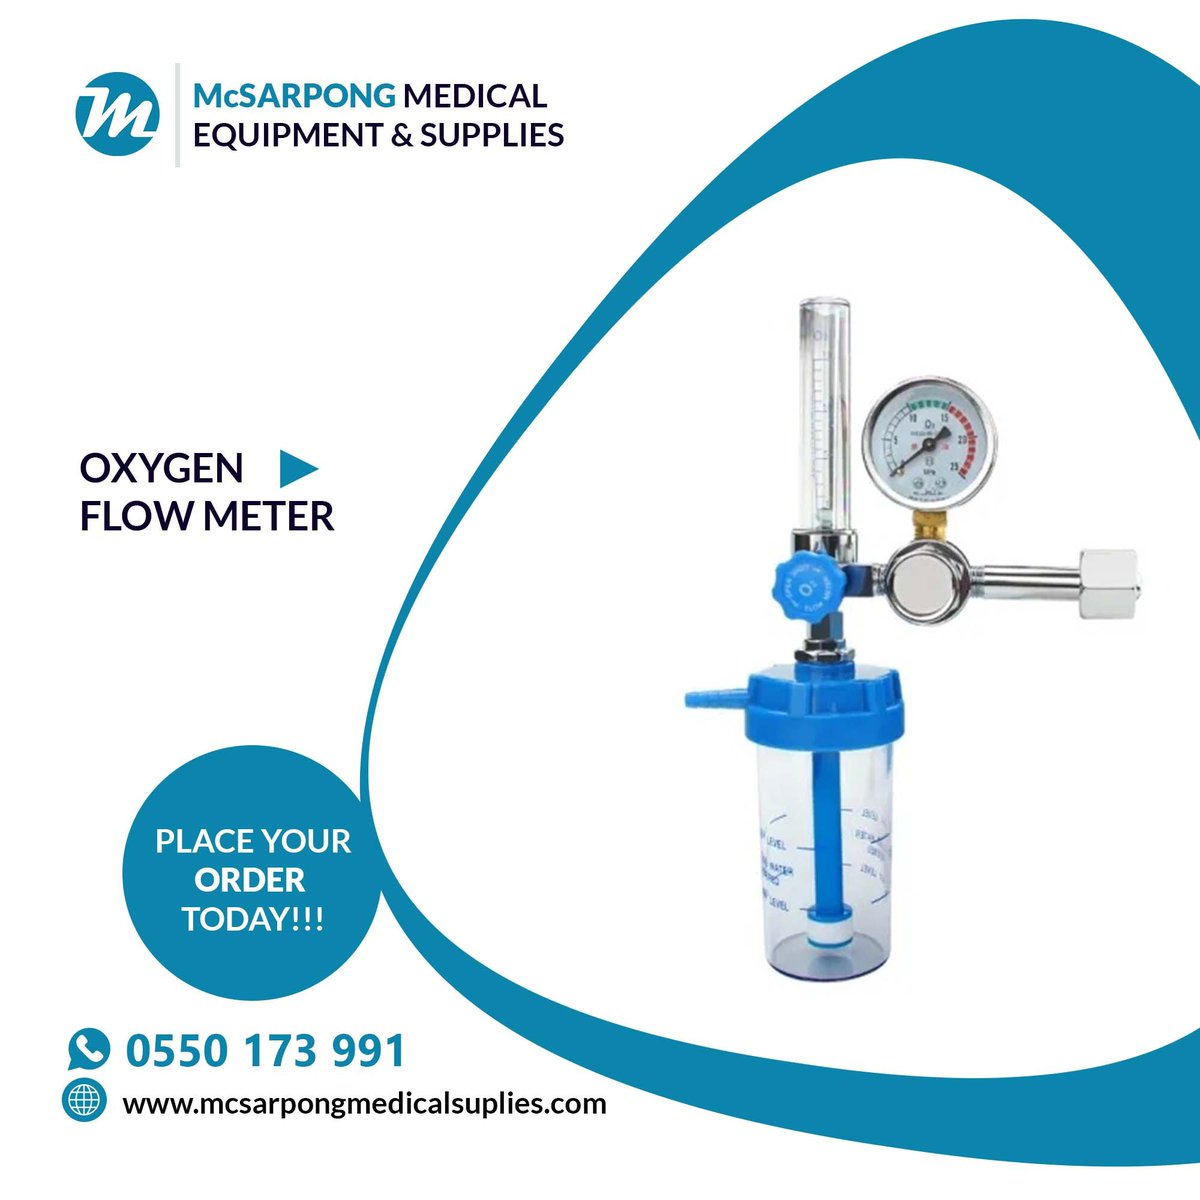 Our Oxygen Flowmeter is designed with precision to enhance patient  comfort and support healthcare professionals in providing top-notch  respiratory care. Trust in quality that breathes life.   #OxygenFlowmeter #RespiratoryCare #HealthWellness'